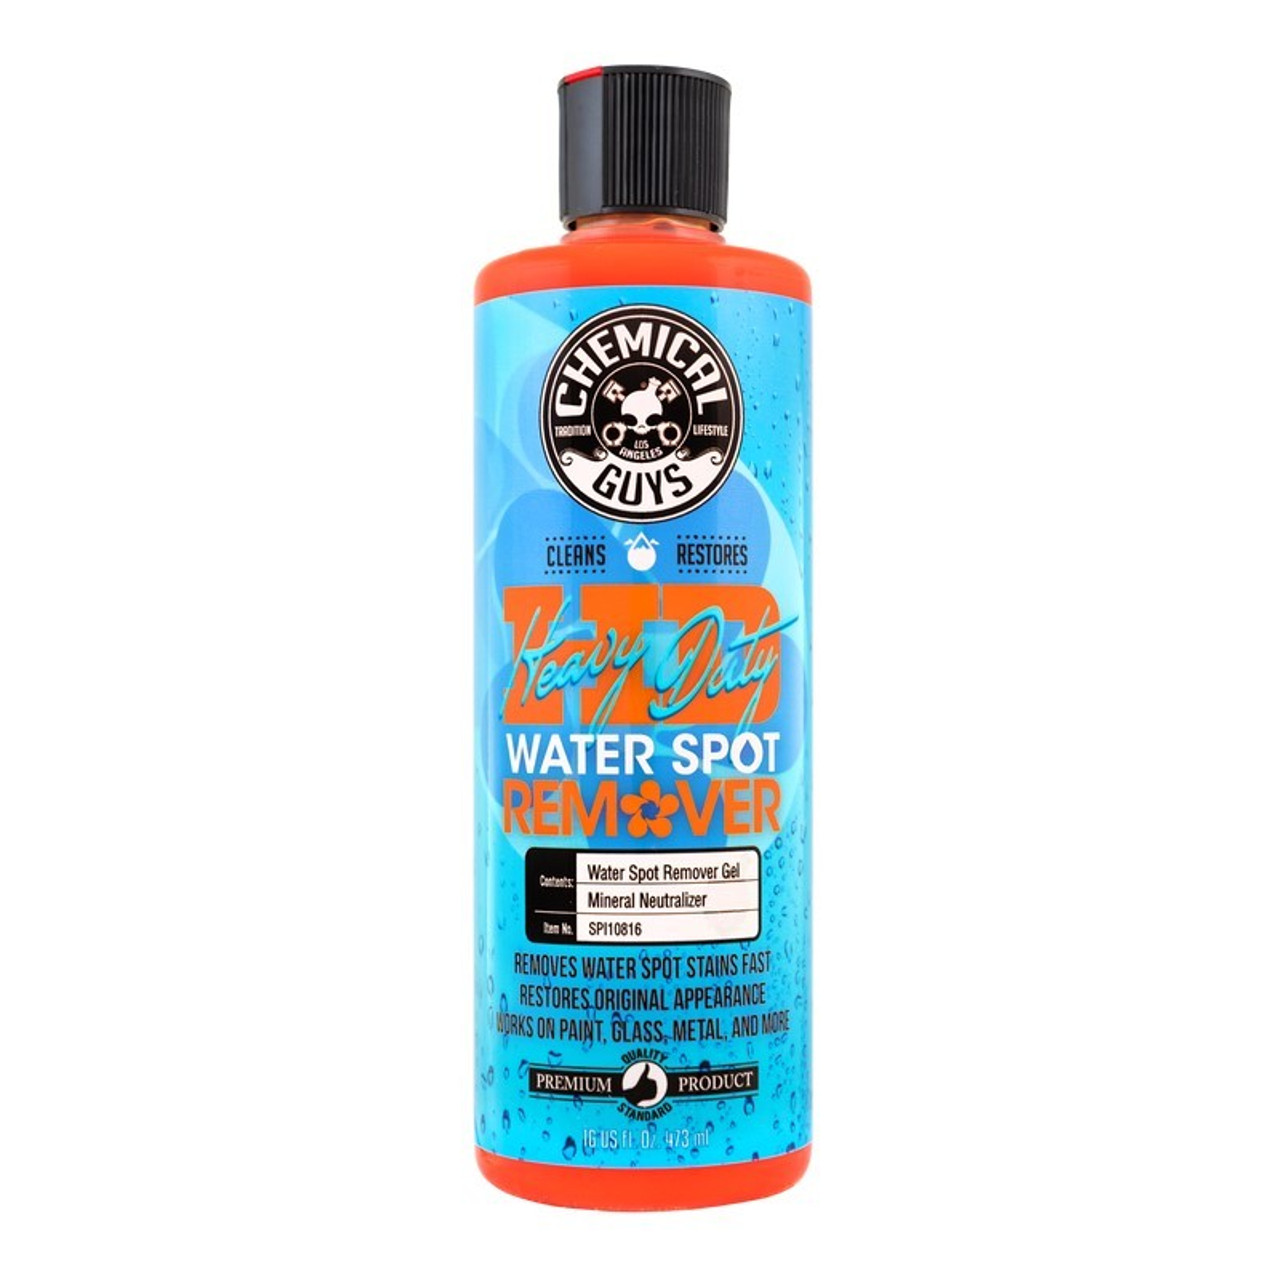 Chemical Guys Heavy Duty Water Spot Remover - 16oz - Case of 6